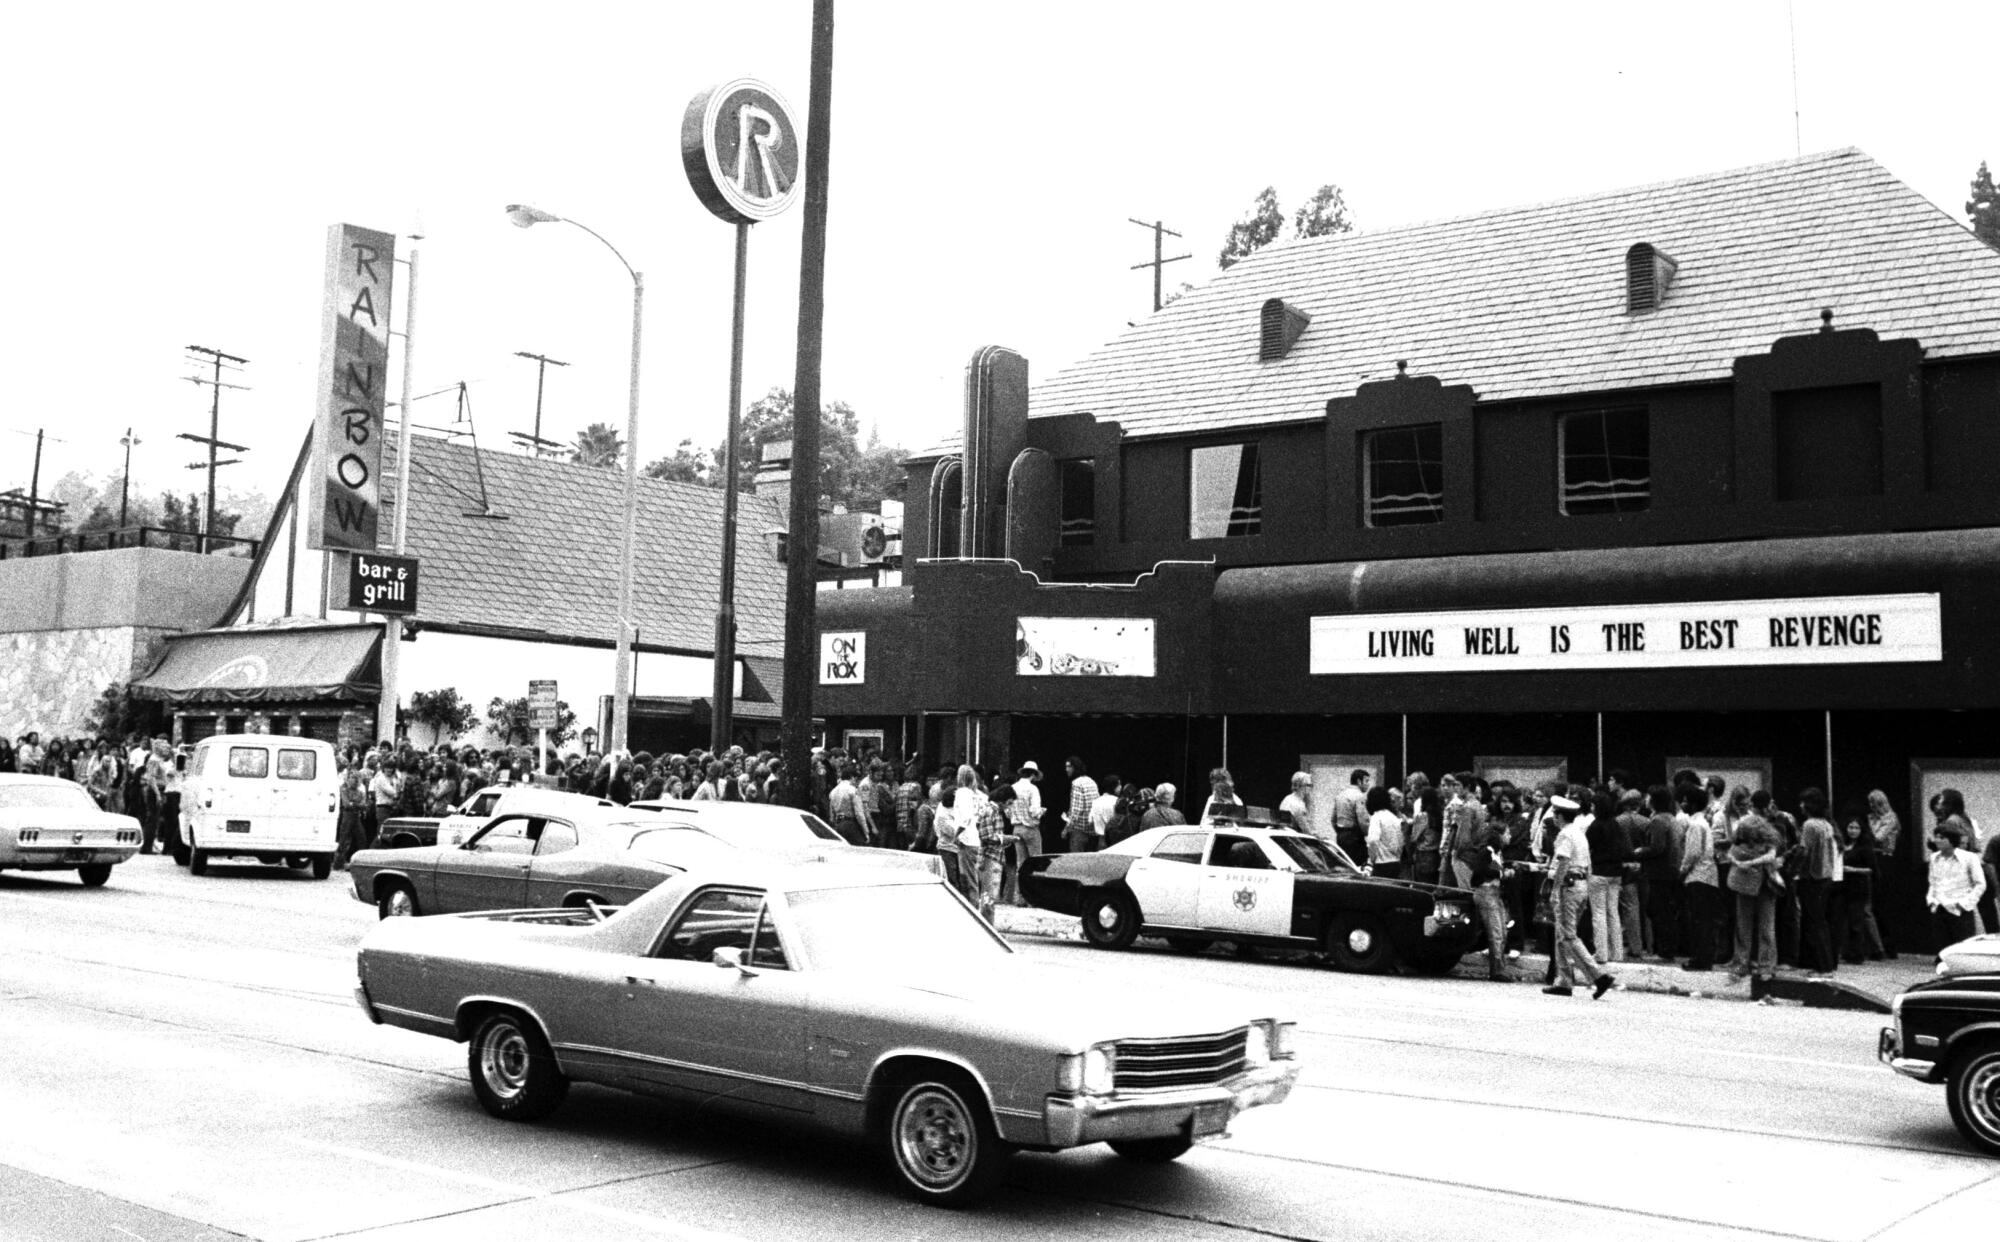 The Roxy Theatre on Sunset Boulevard in 1973.